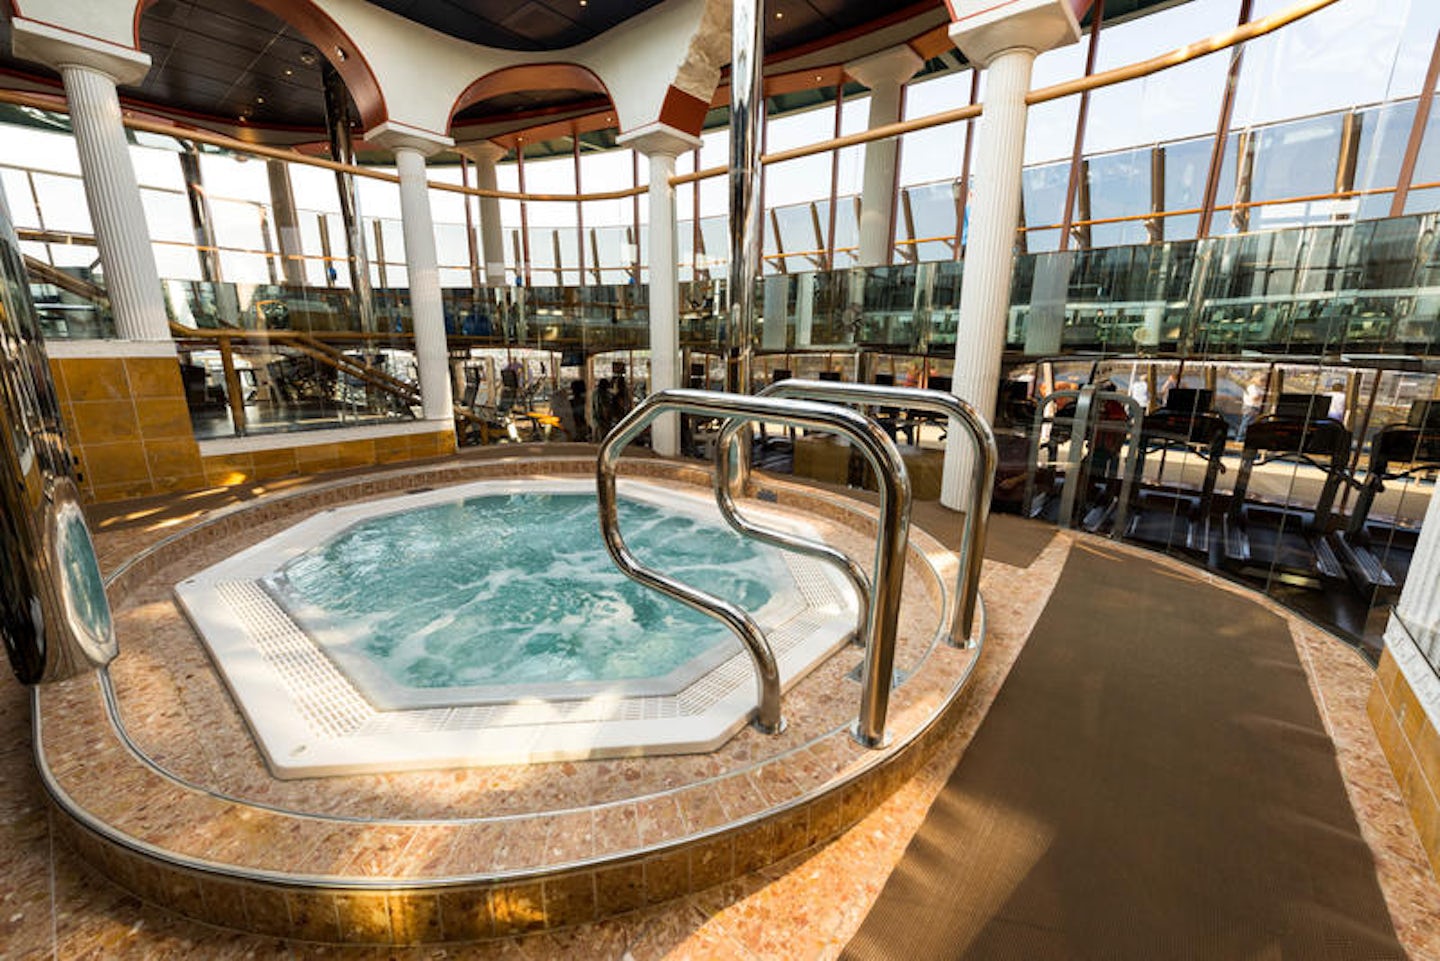 Whirlpool in The Fountain of Youth Spa on Carnival Legend